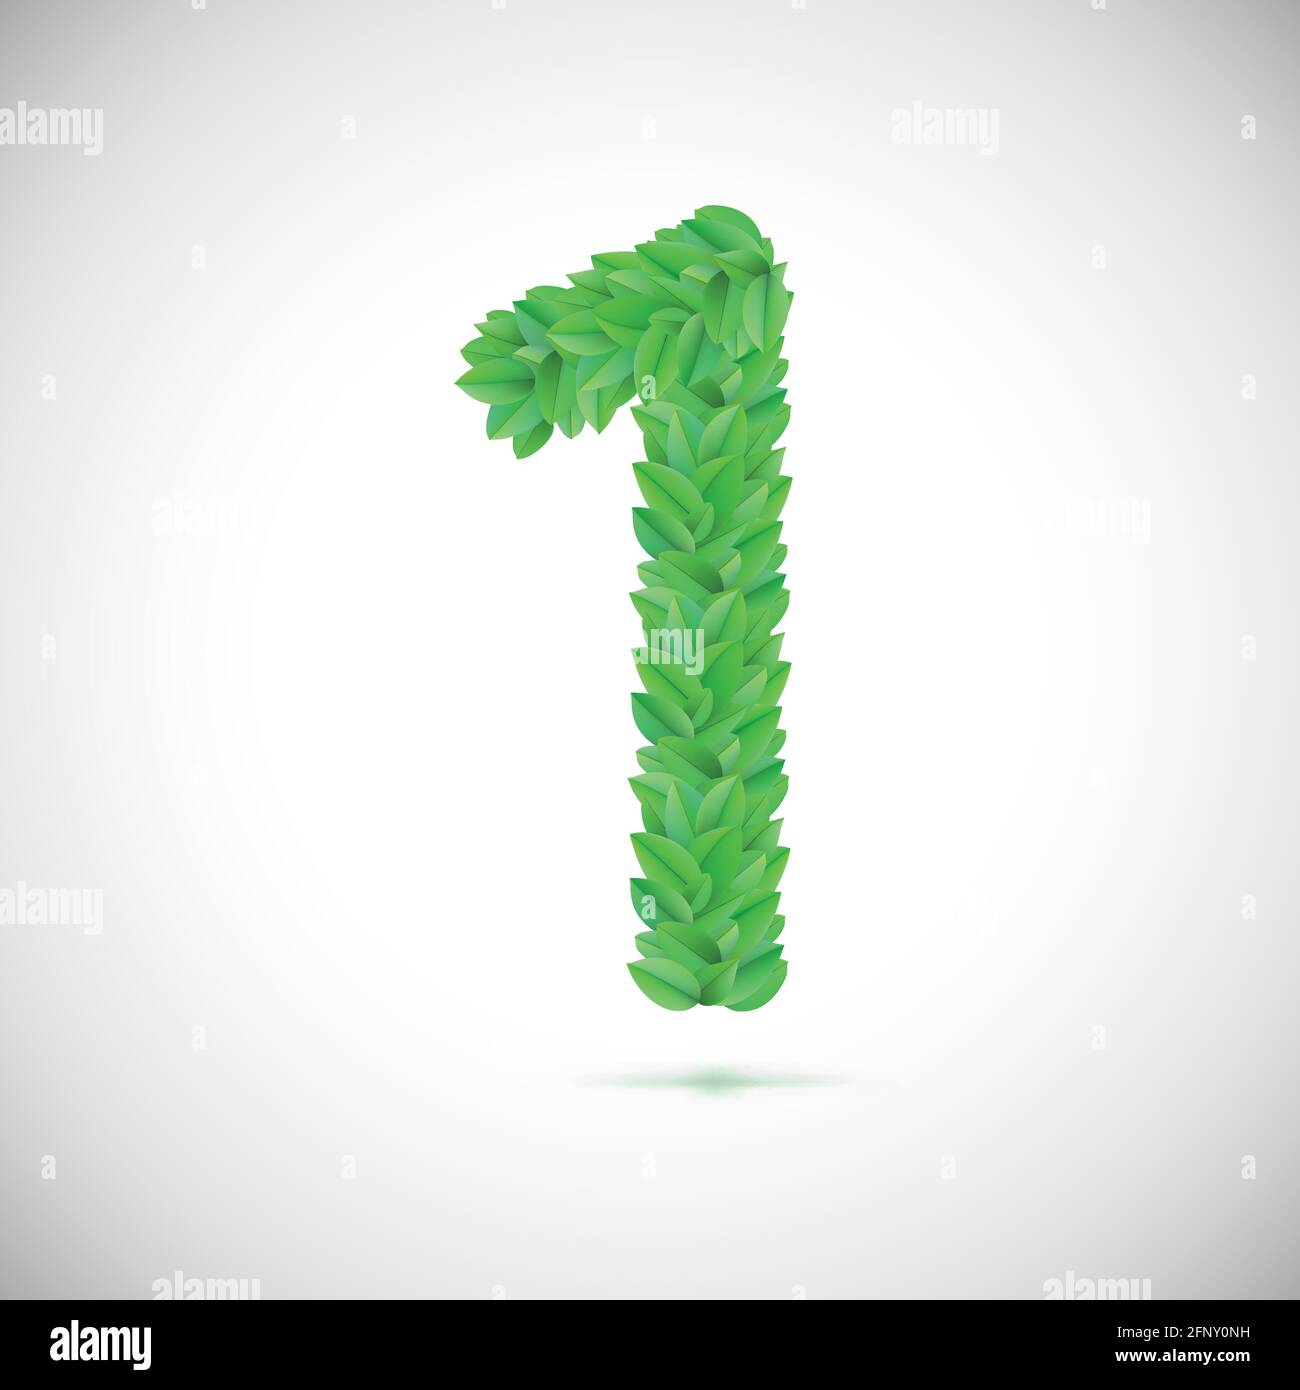 Numeral one made up of green leaves Stock Vector